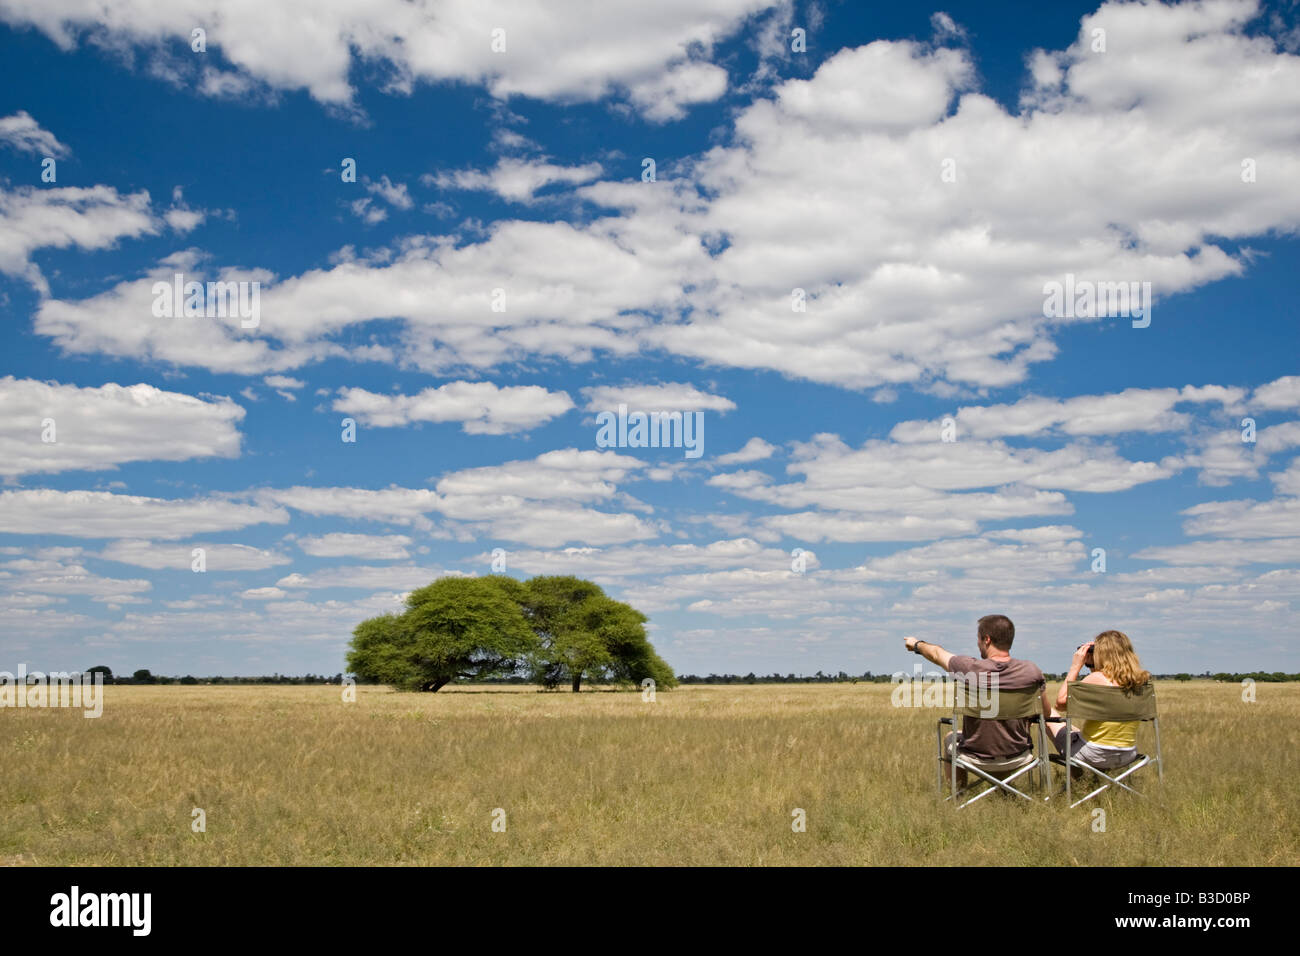 Africa, Botswana, Tourists looking at the landscape Stock Photo